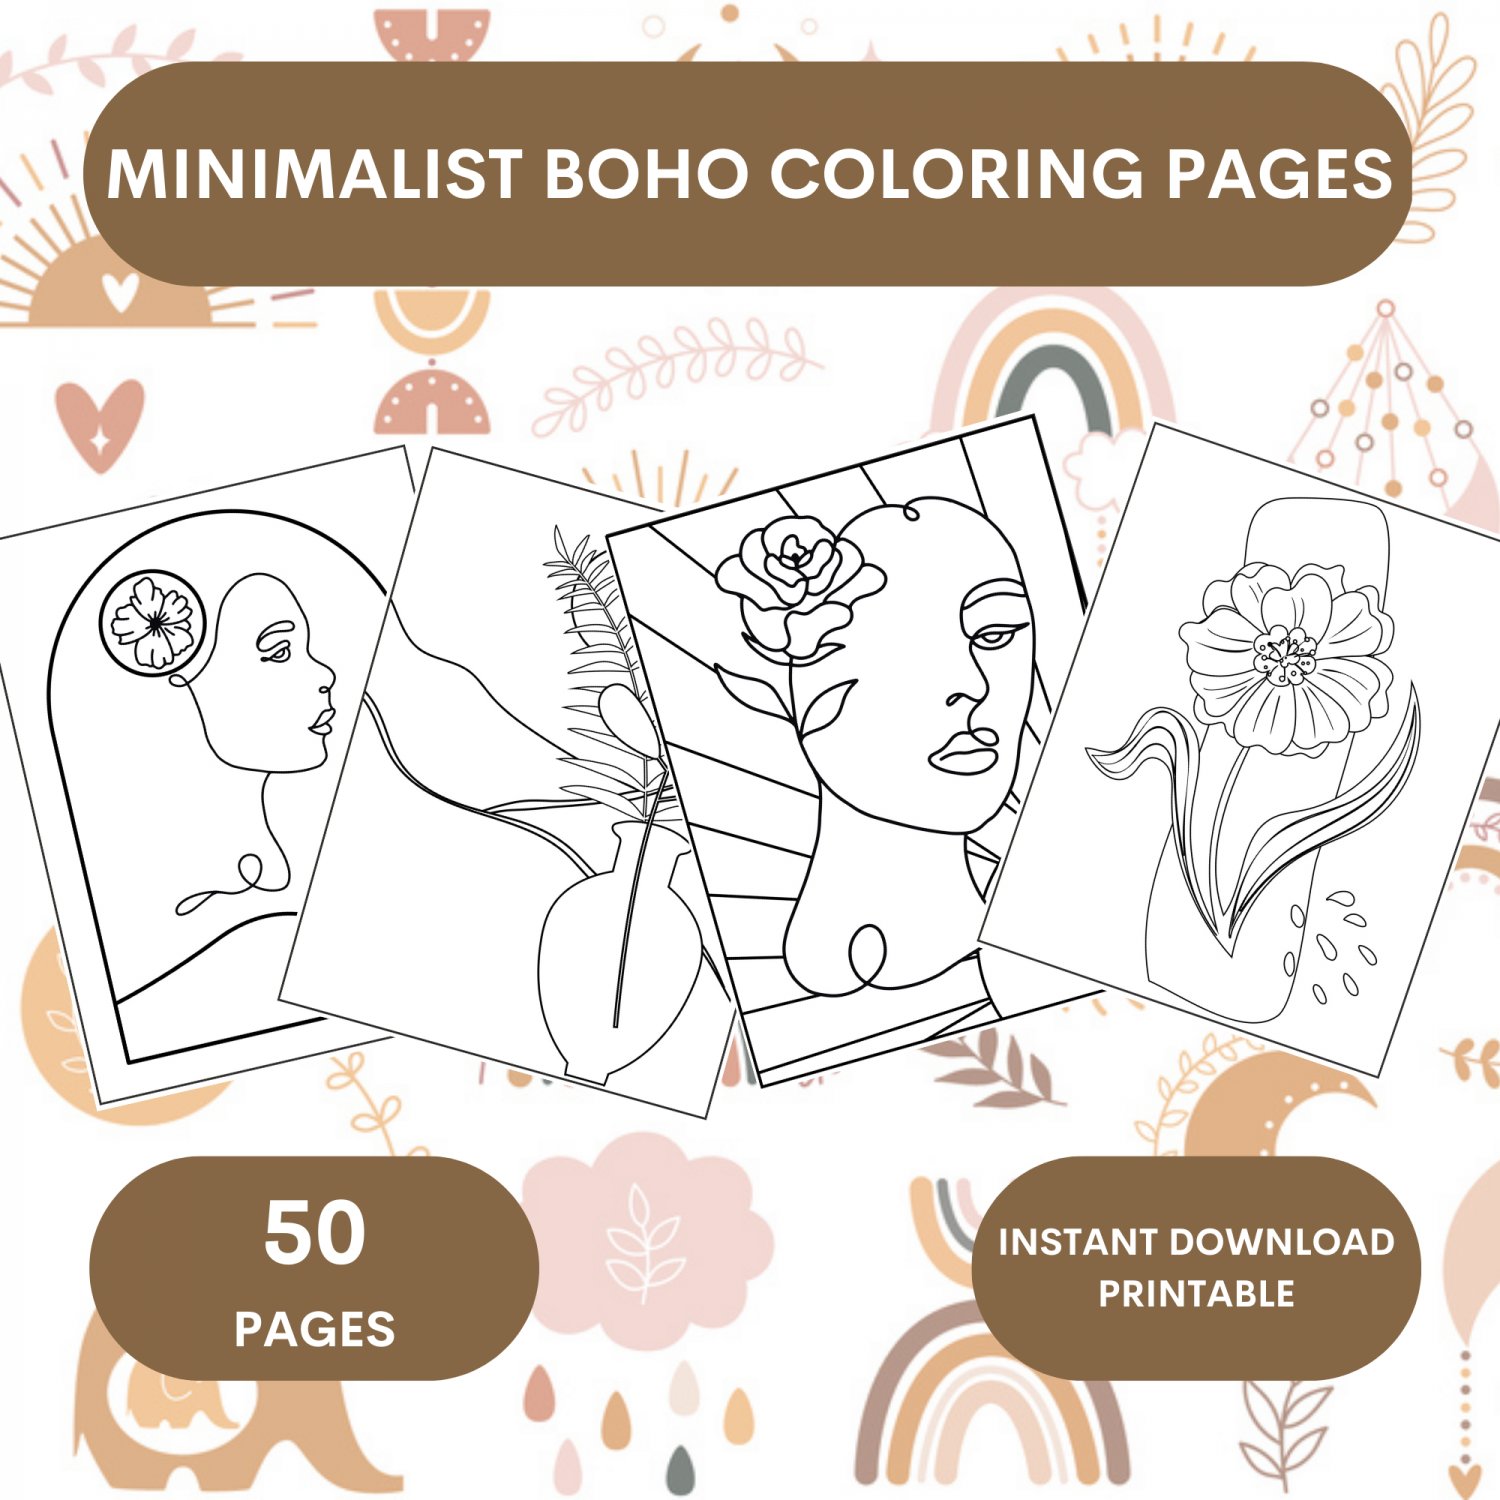 Minimalist Boho Coloring Pages for Adults | Boho Printable Coloring Book |instant download